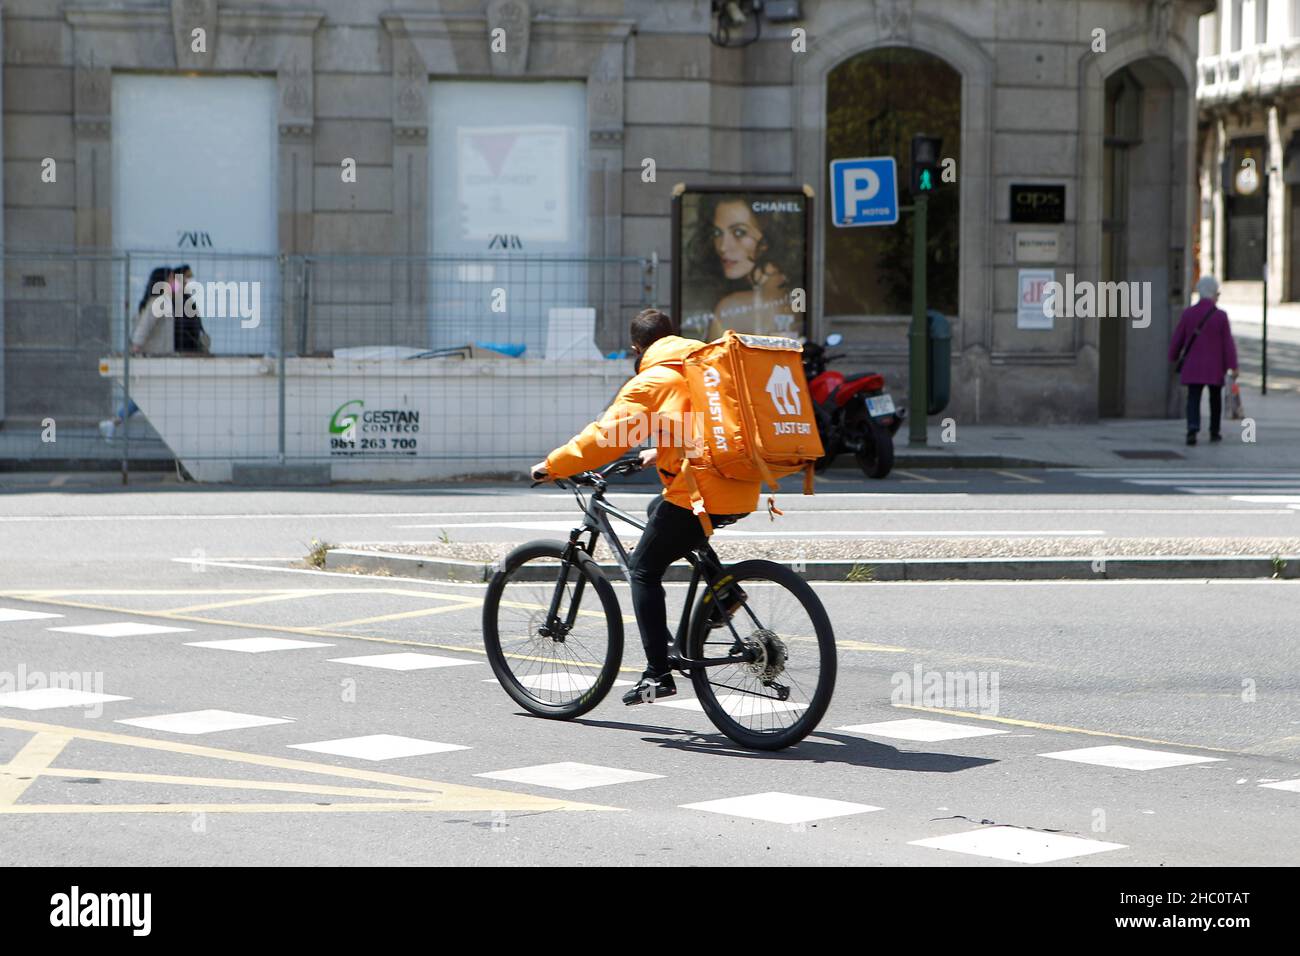 Just Eat Worker Rider Bikes Riding on his bike Delivering Food in A Coruna on May 1, 2021 Stock Photo